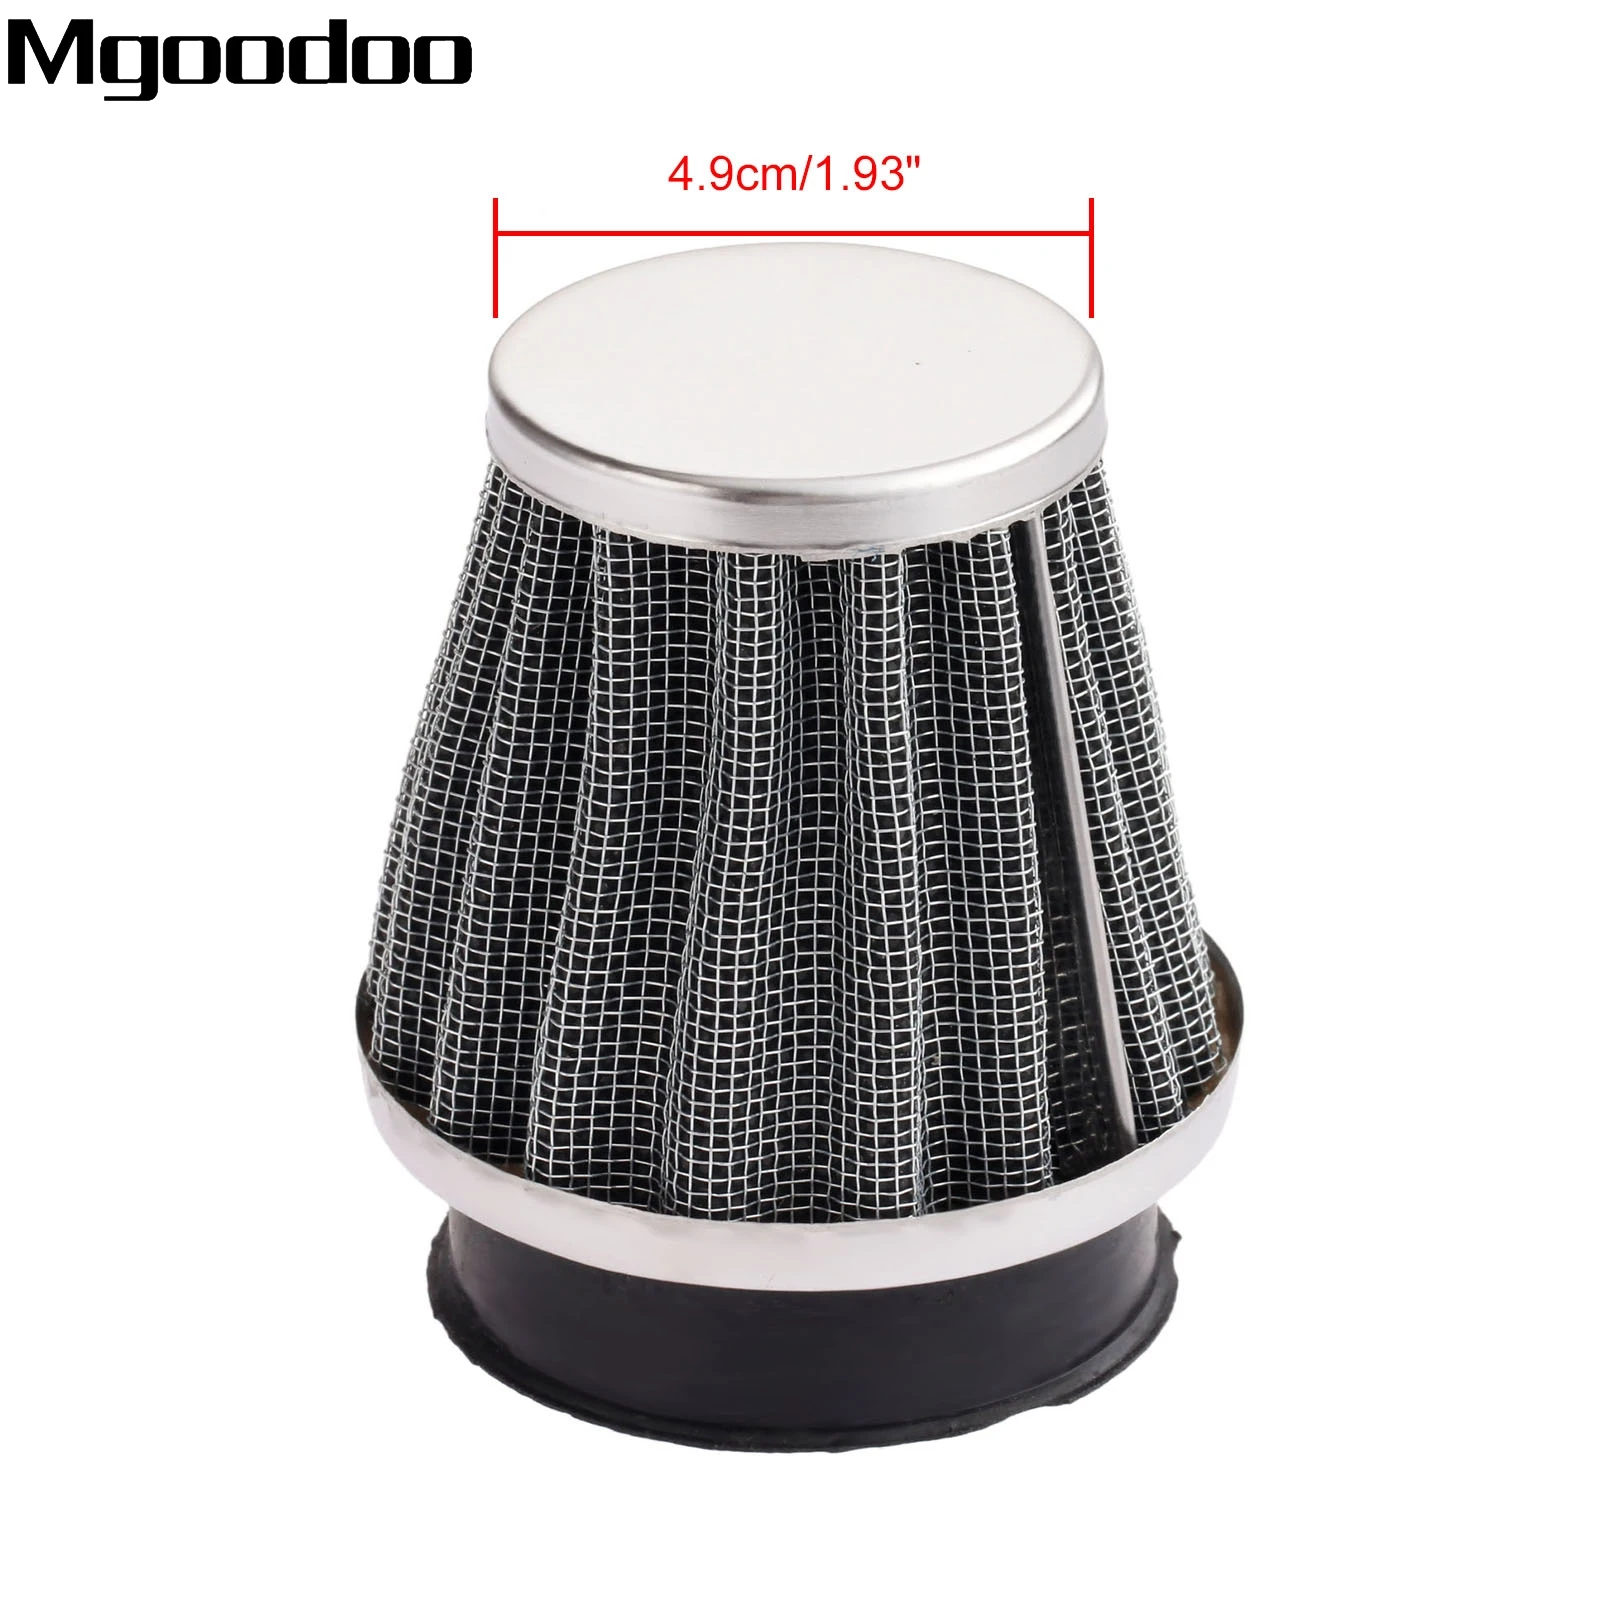 

Mgoodoo 54mm Double Layer Steel Air Filter Gauze Clamp-on Air Cleaner Pods For Honda Kawasaki ATV Scooter Minibike Dirt Bike